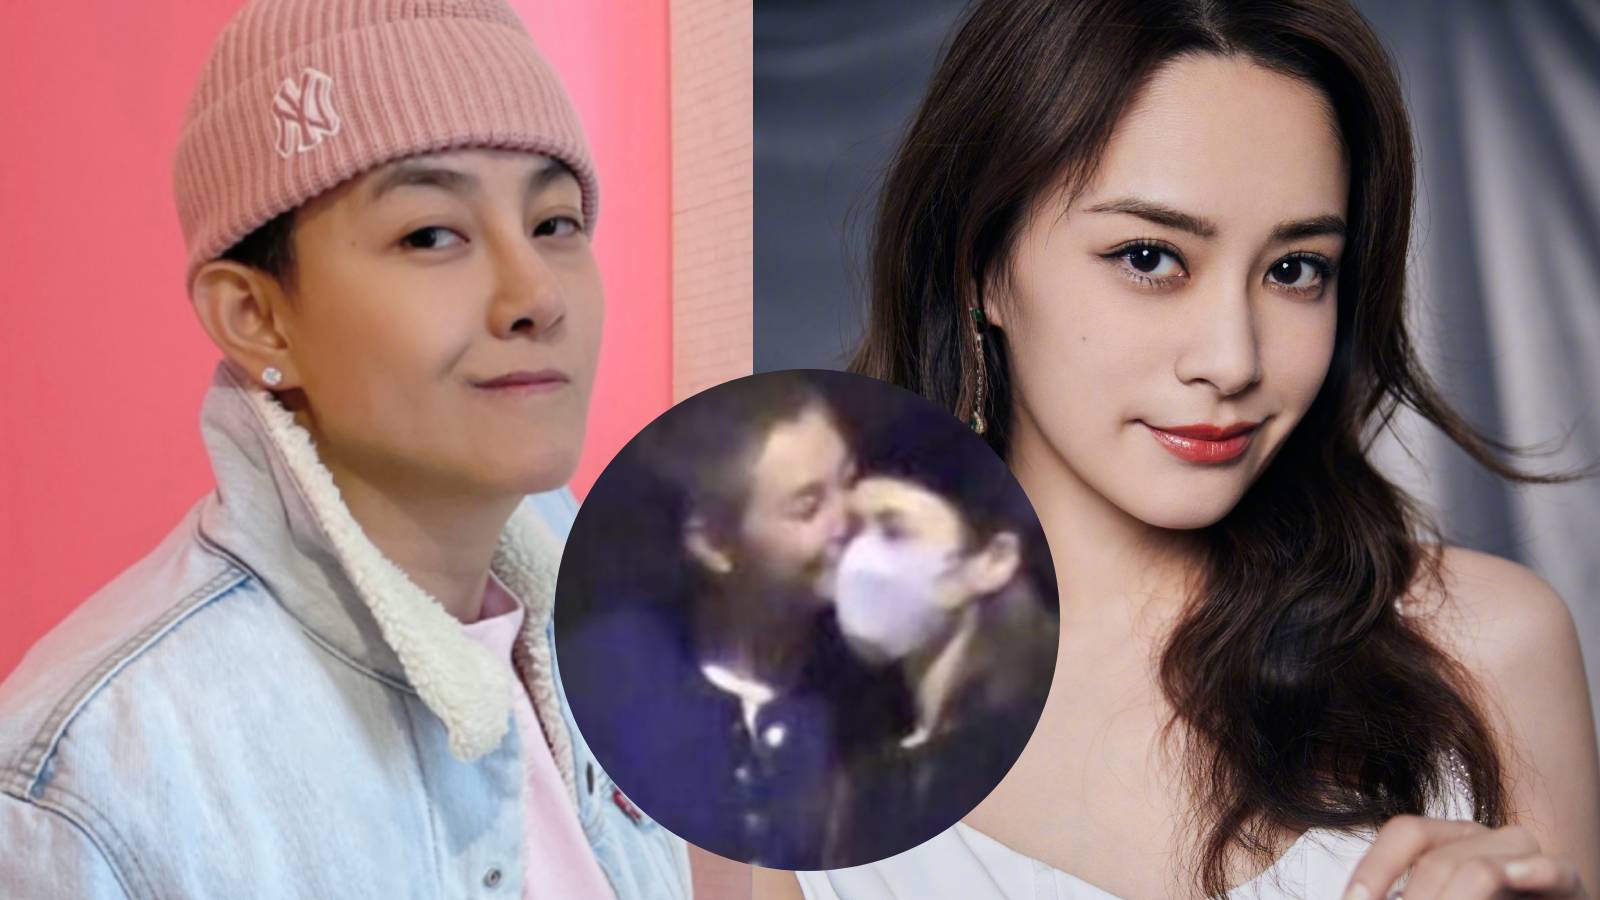 Gillian Chung Seen Getting Kissed By Influencer Known As Female Edison Chen After Night